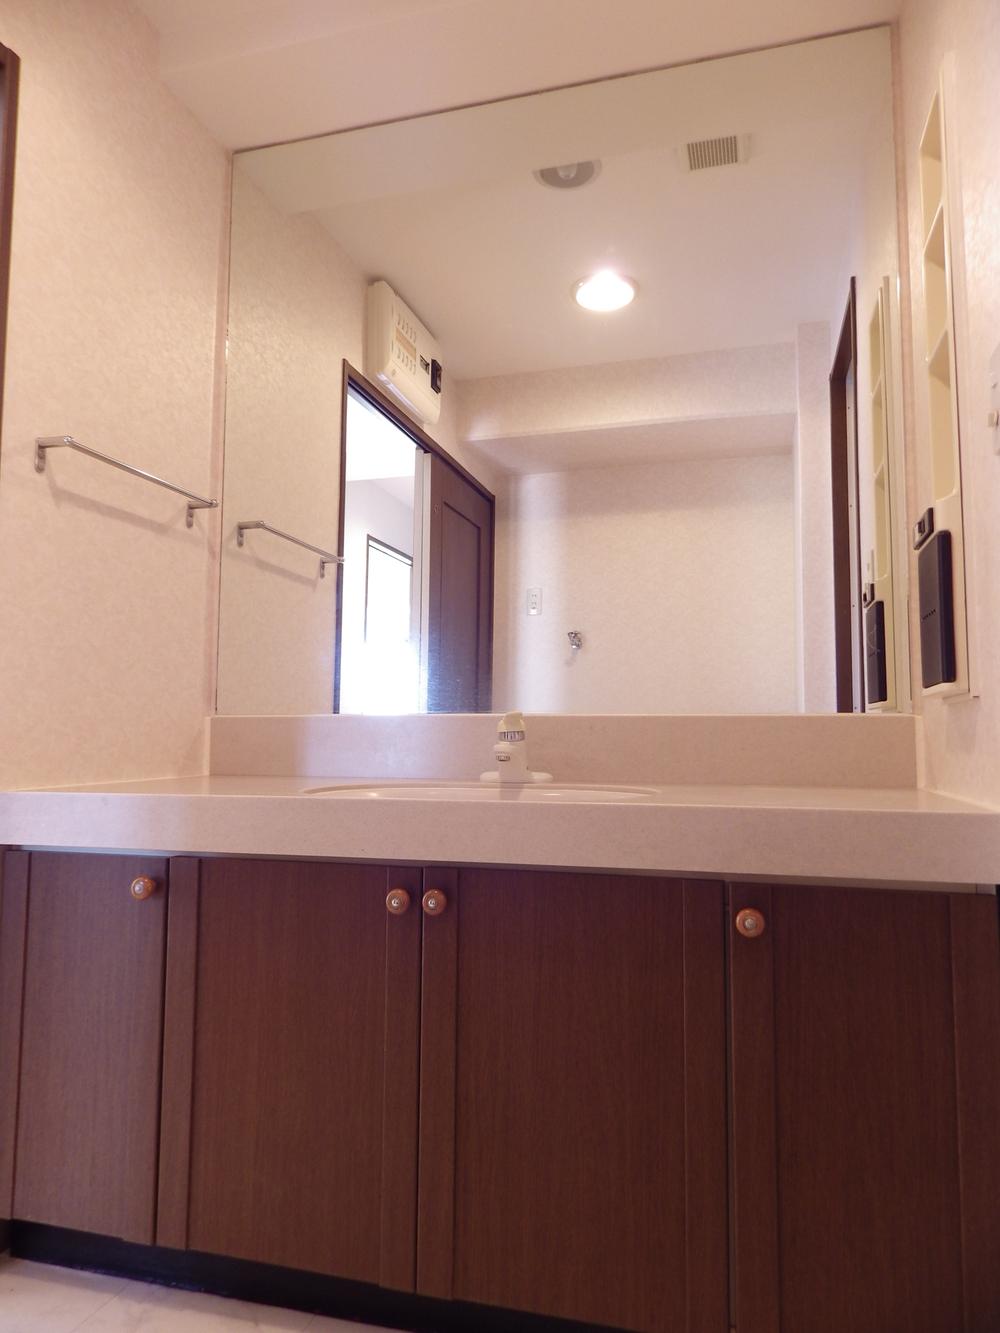 Wash basin, toilet. Vanity with a storage space of a large mirror and a large capacity.